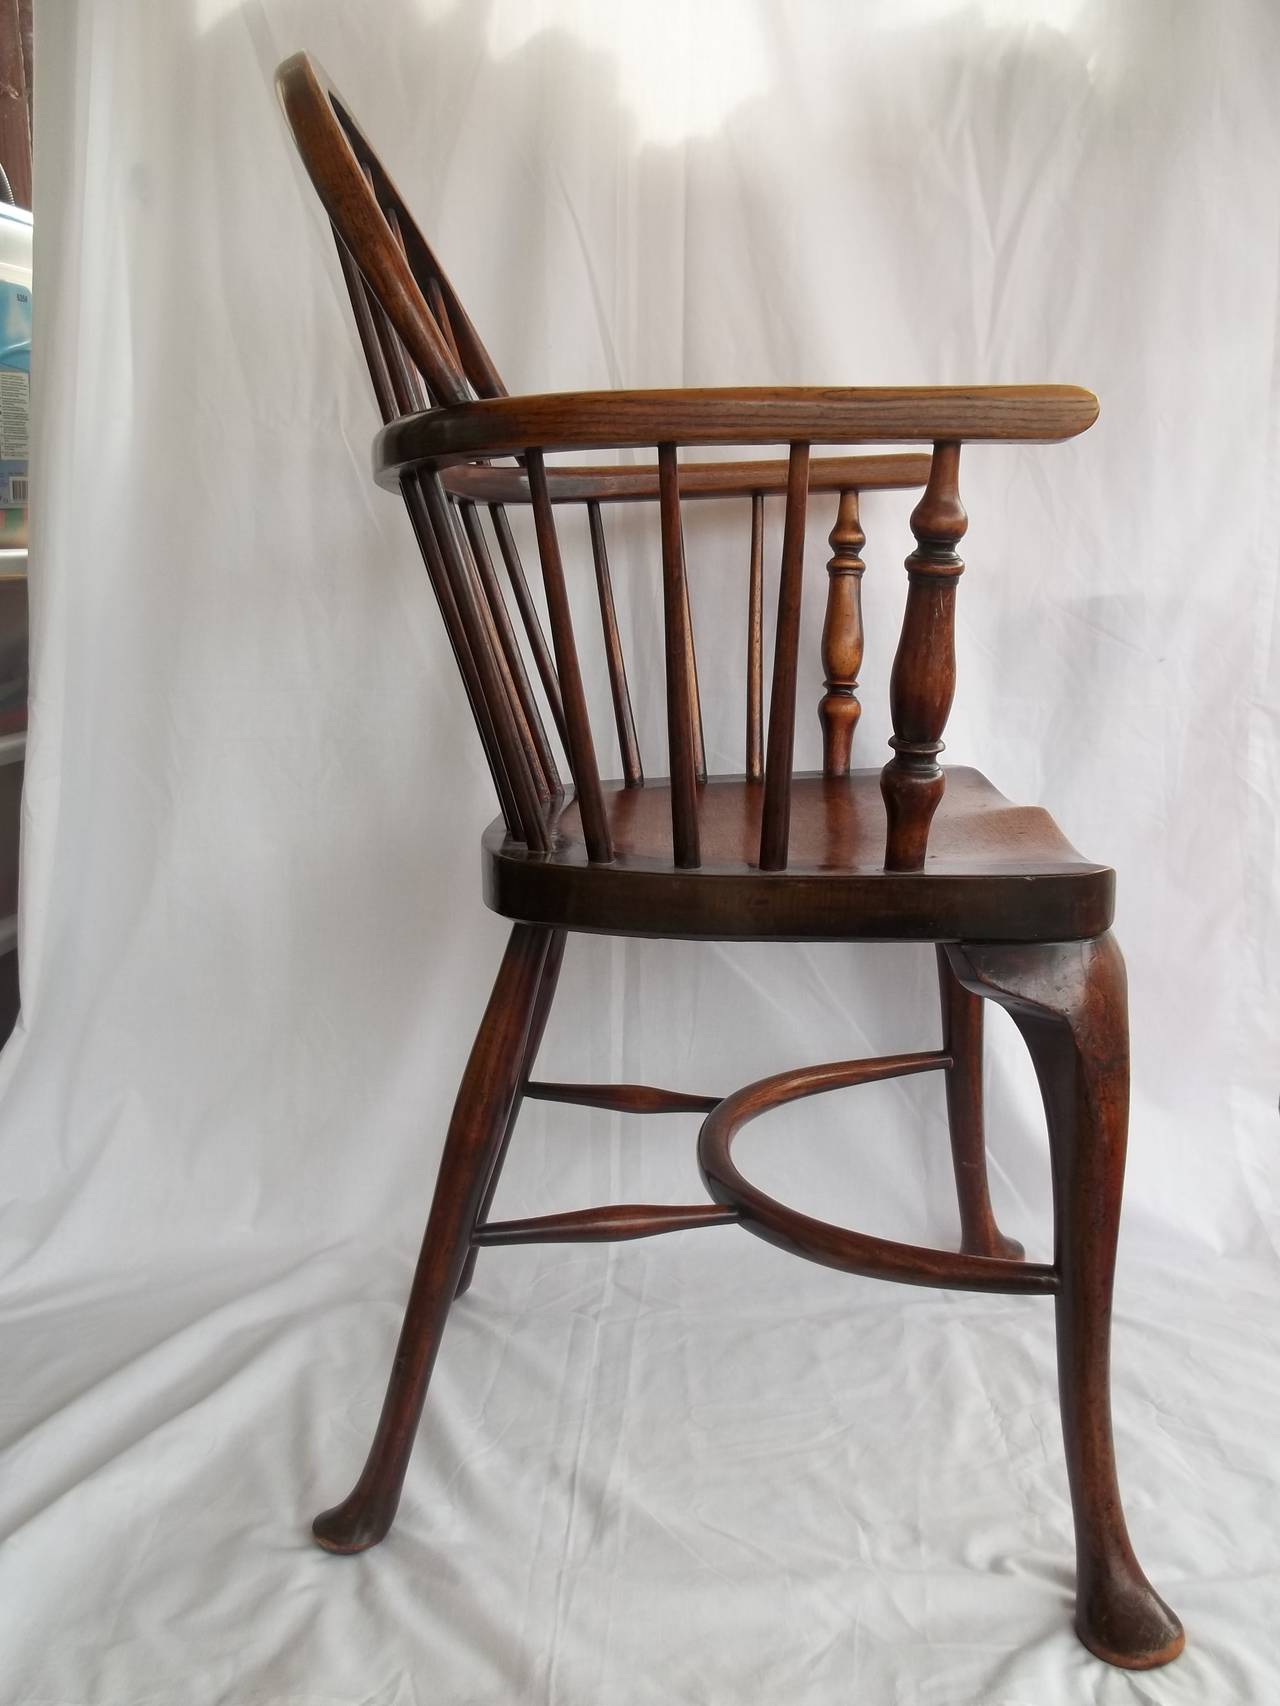 Country 19th Century Low-Back Windsor Armchair with Cabriole Legs